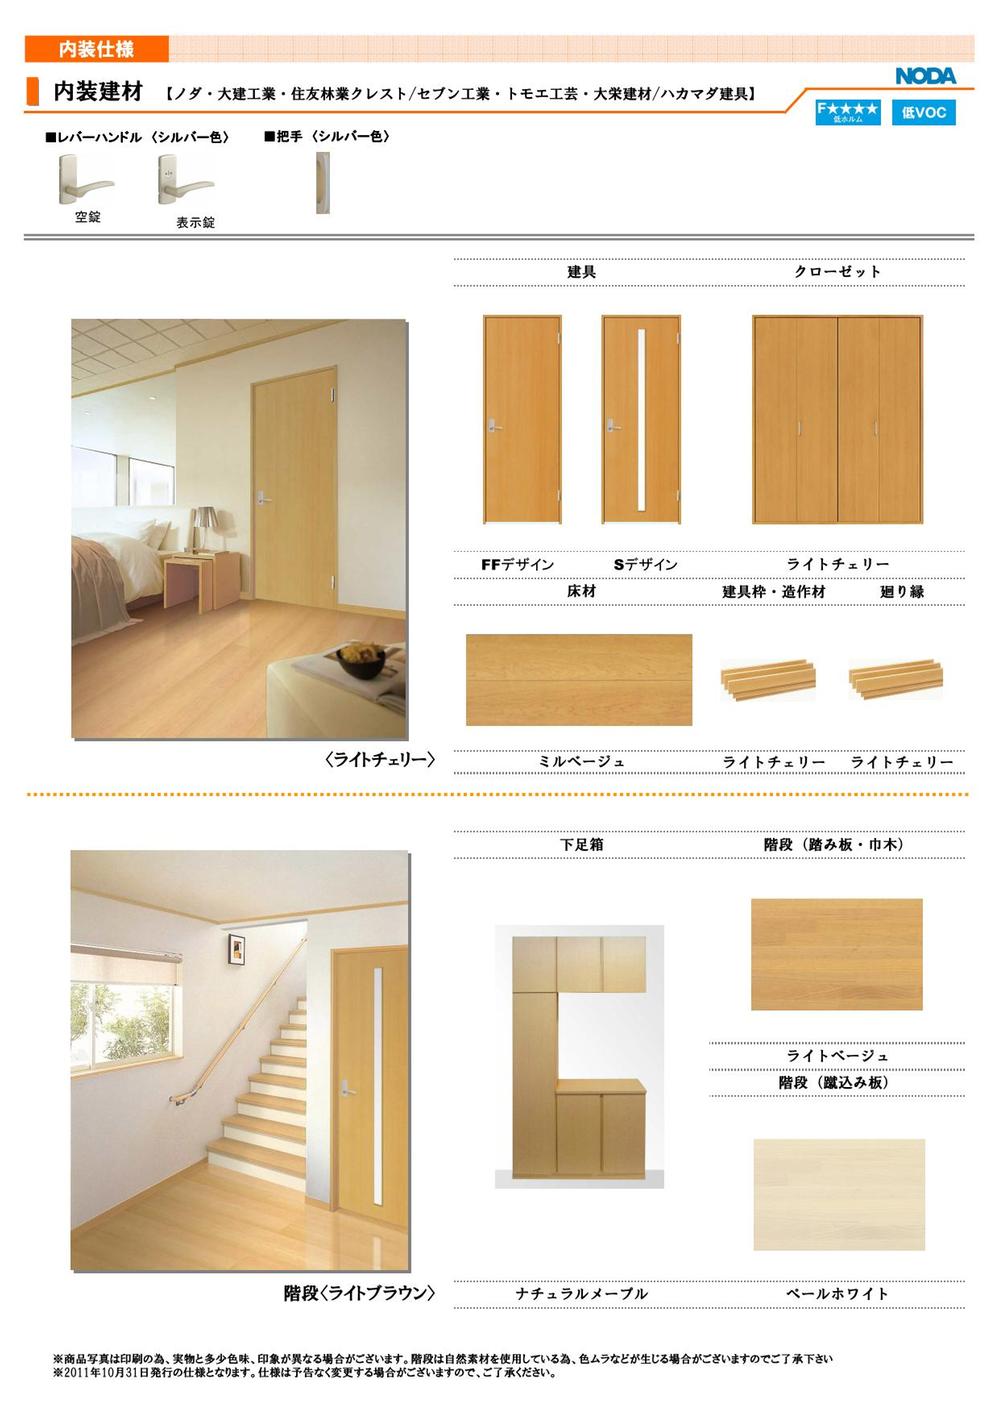 Construction ・ Construction method ・ specification. Specification brochure image housing performance evaluation is marked with peace of mind property